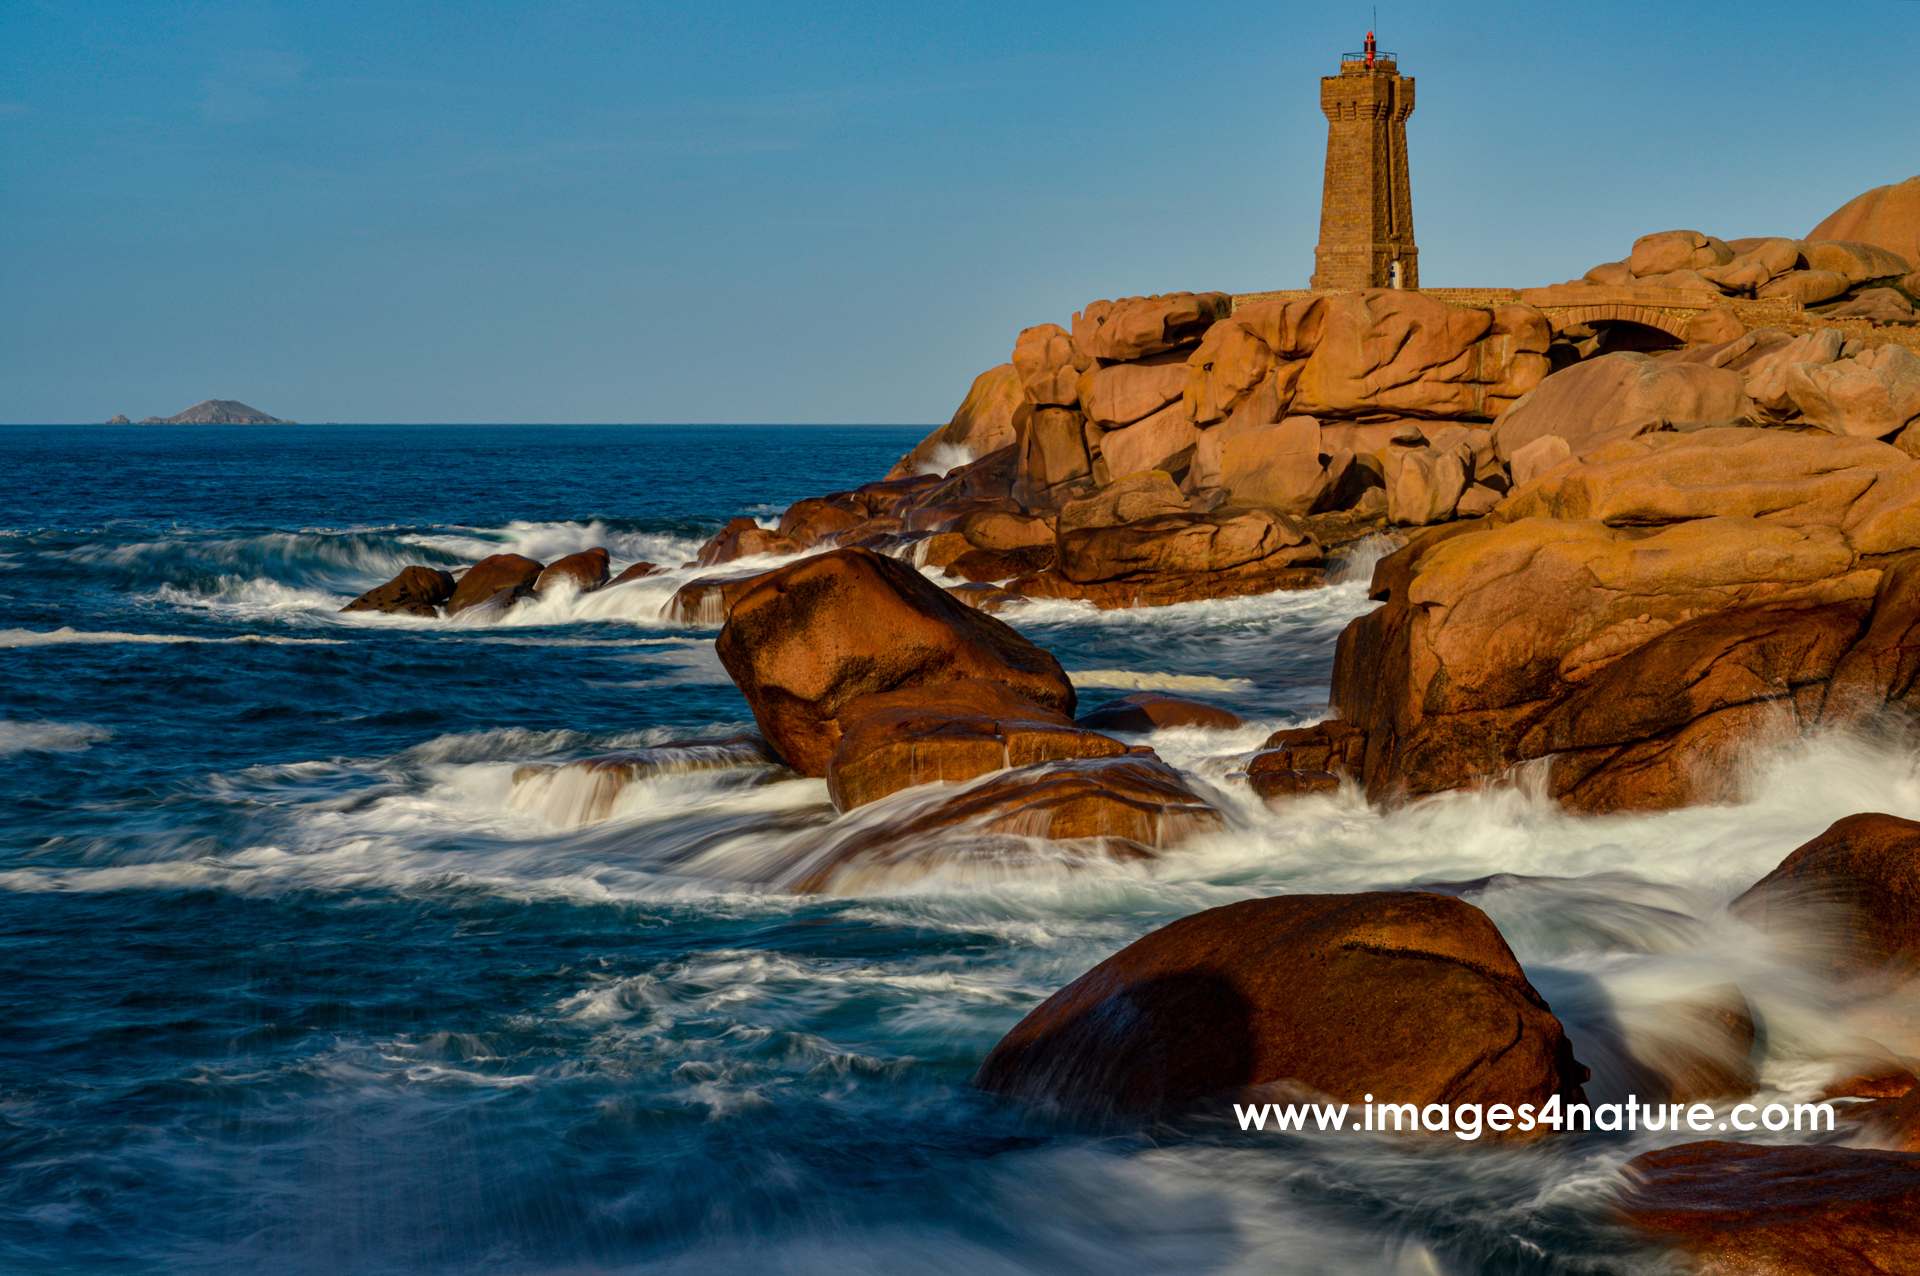 For good reasons, this is one of the most frequently photographed landmarks on the pink granite coast in Brittany  The Ploumanac'h lighthouse in Perros Guirec enjoys a spectacular location  What makes it special is that its color perfectly matches the surrounding landscape  Whilst I didn't visit it in the morning, I guess late afternoon is probably the best time for amazing light and color contrasts  I really like how the long exposure time creates this really smooth texture on the waves of the Atlantic ocean   France, Ploumanac'h, October 2022   Image ID 202210 FR 09